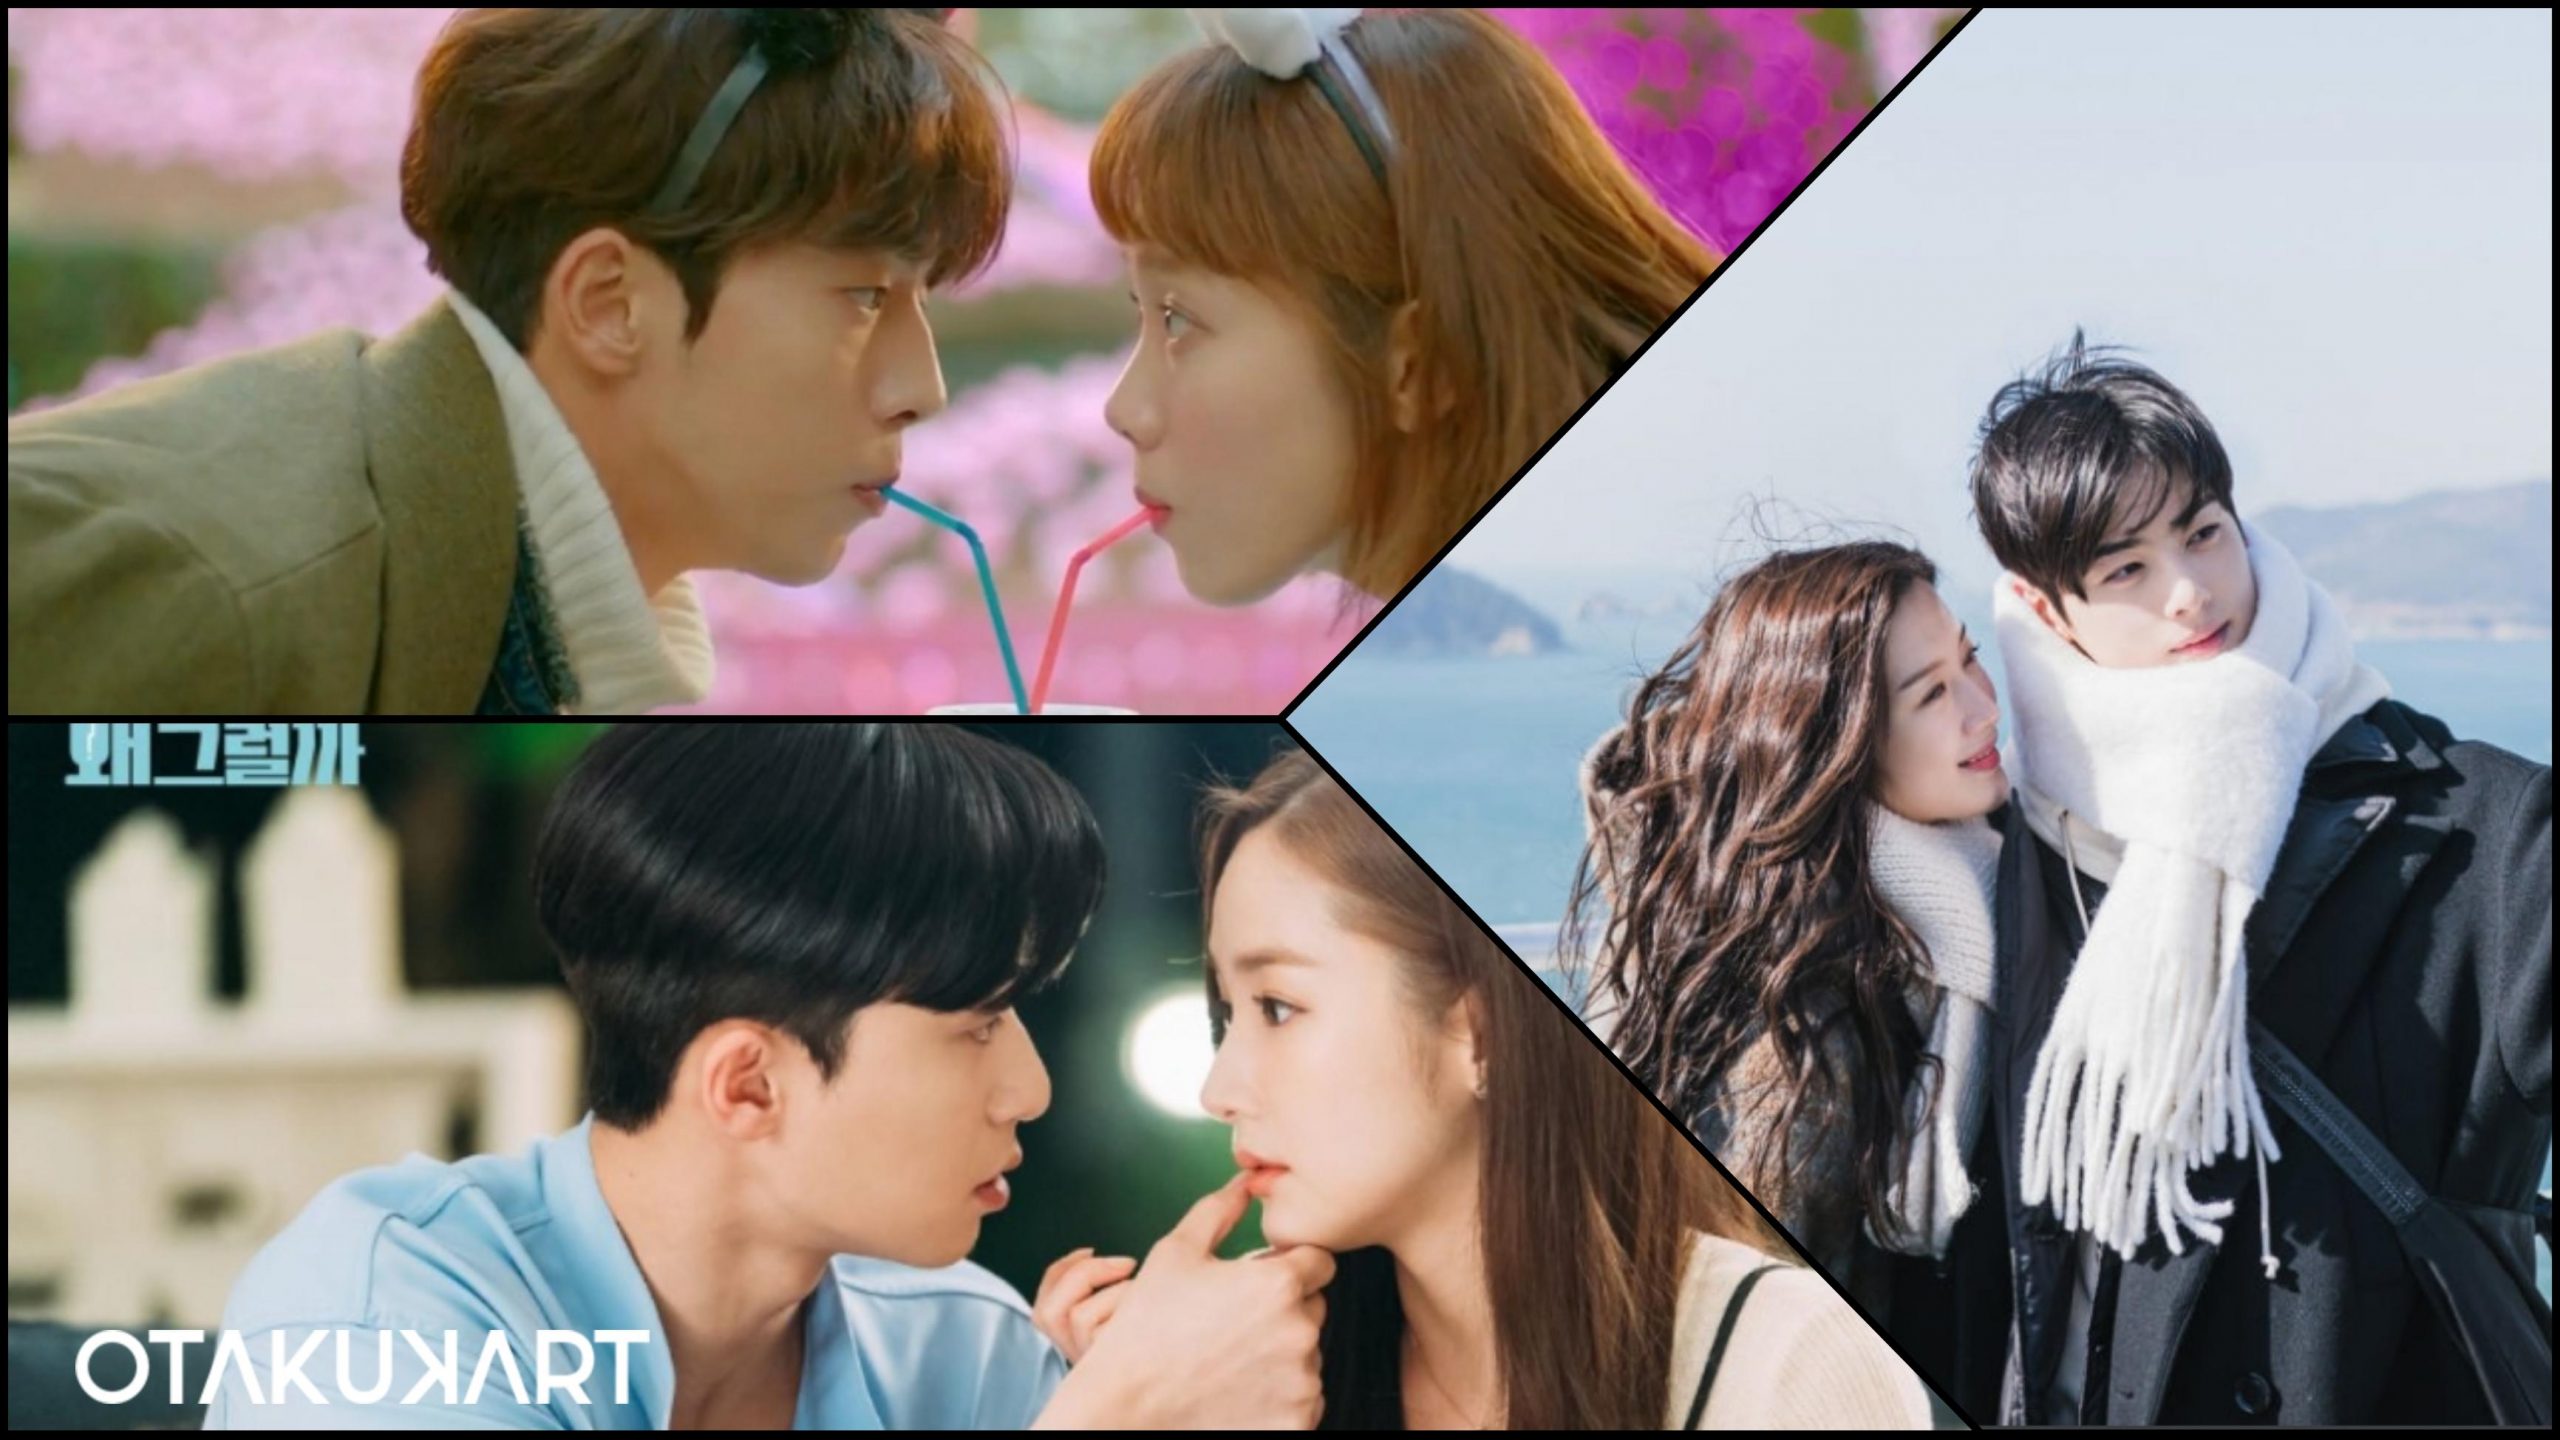 Top 6 K-Drama Leads Who Are Boyfriend Material